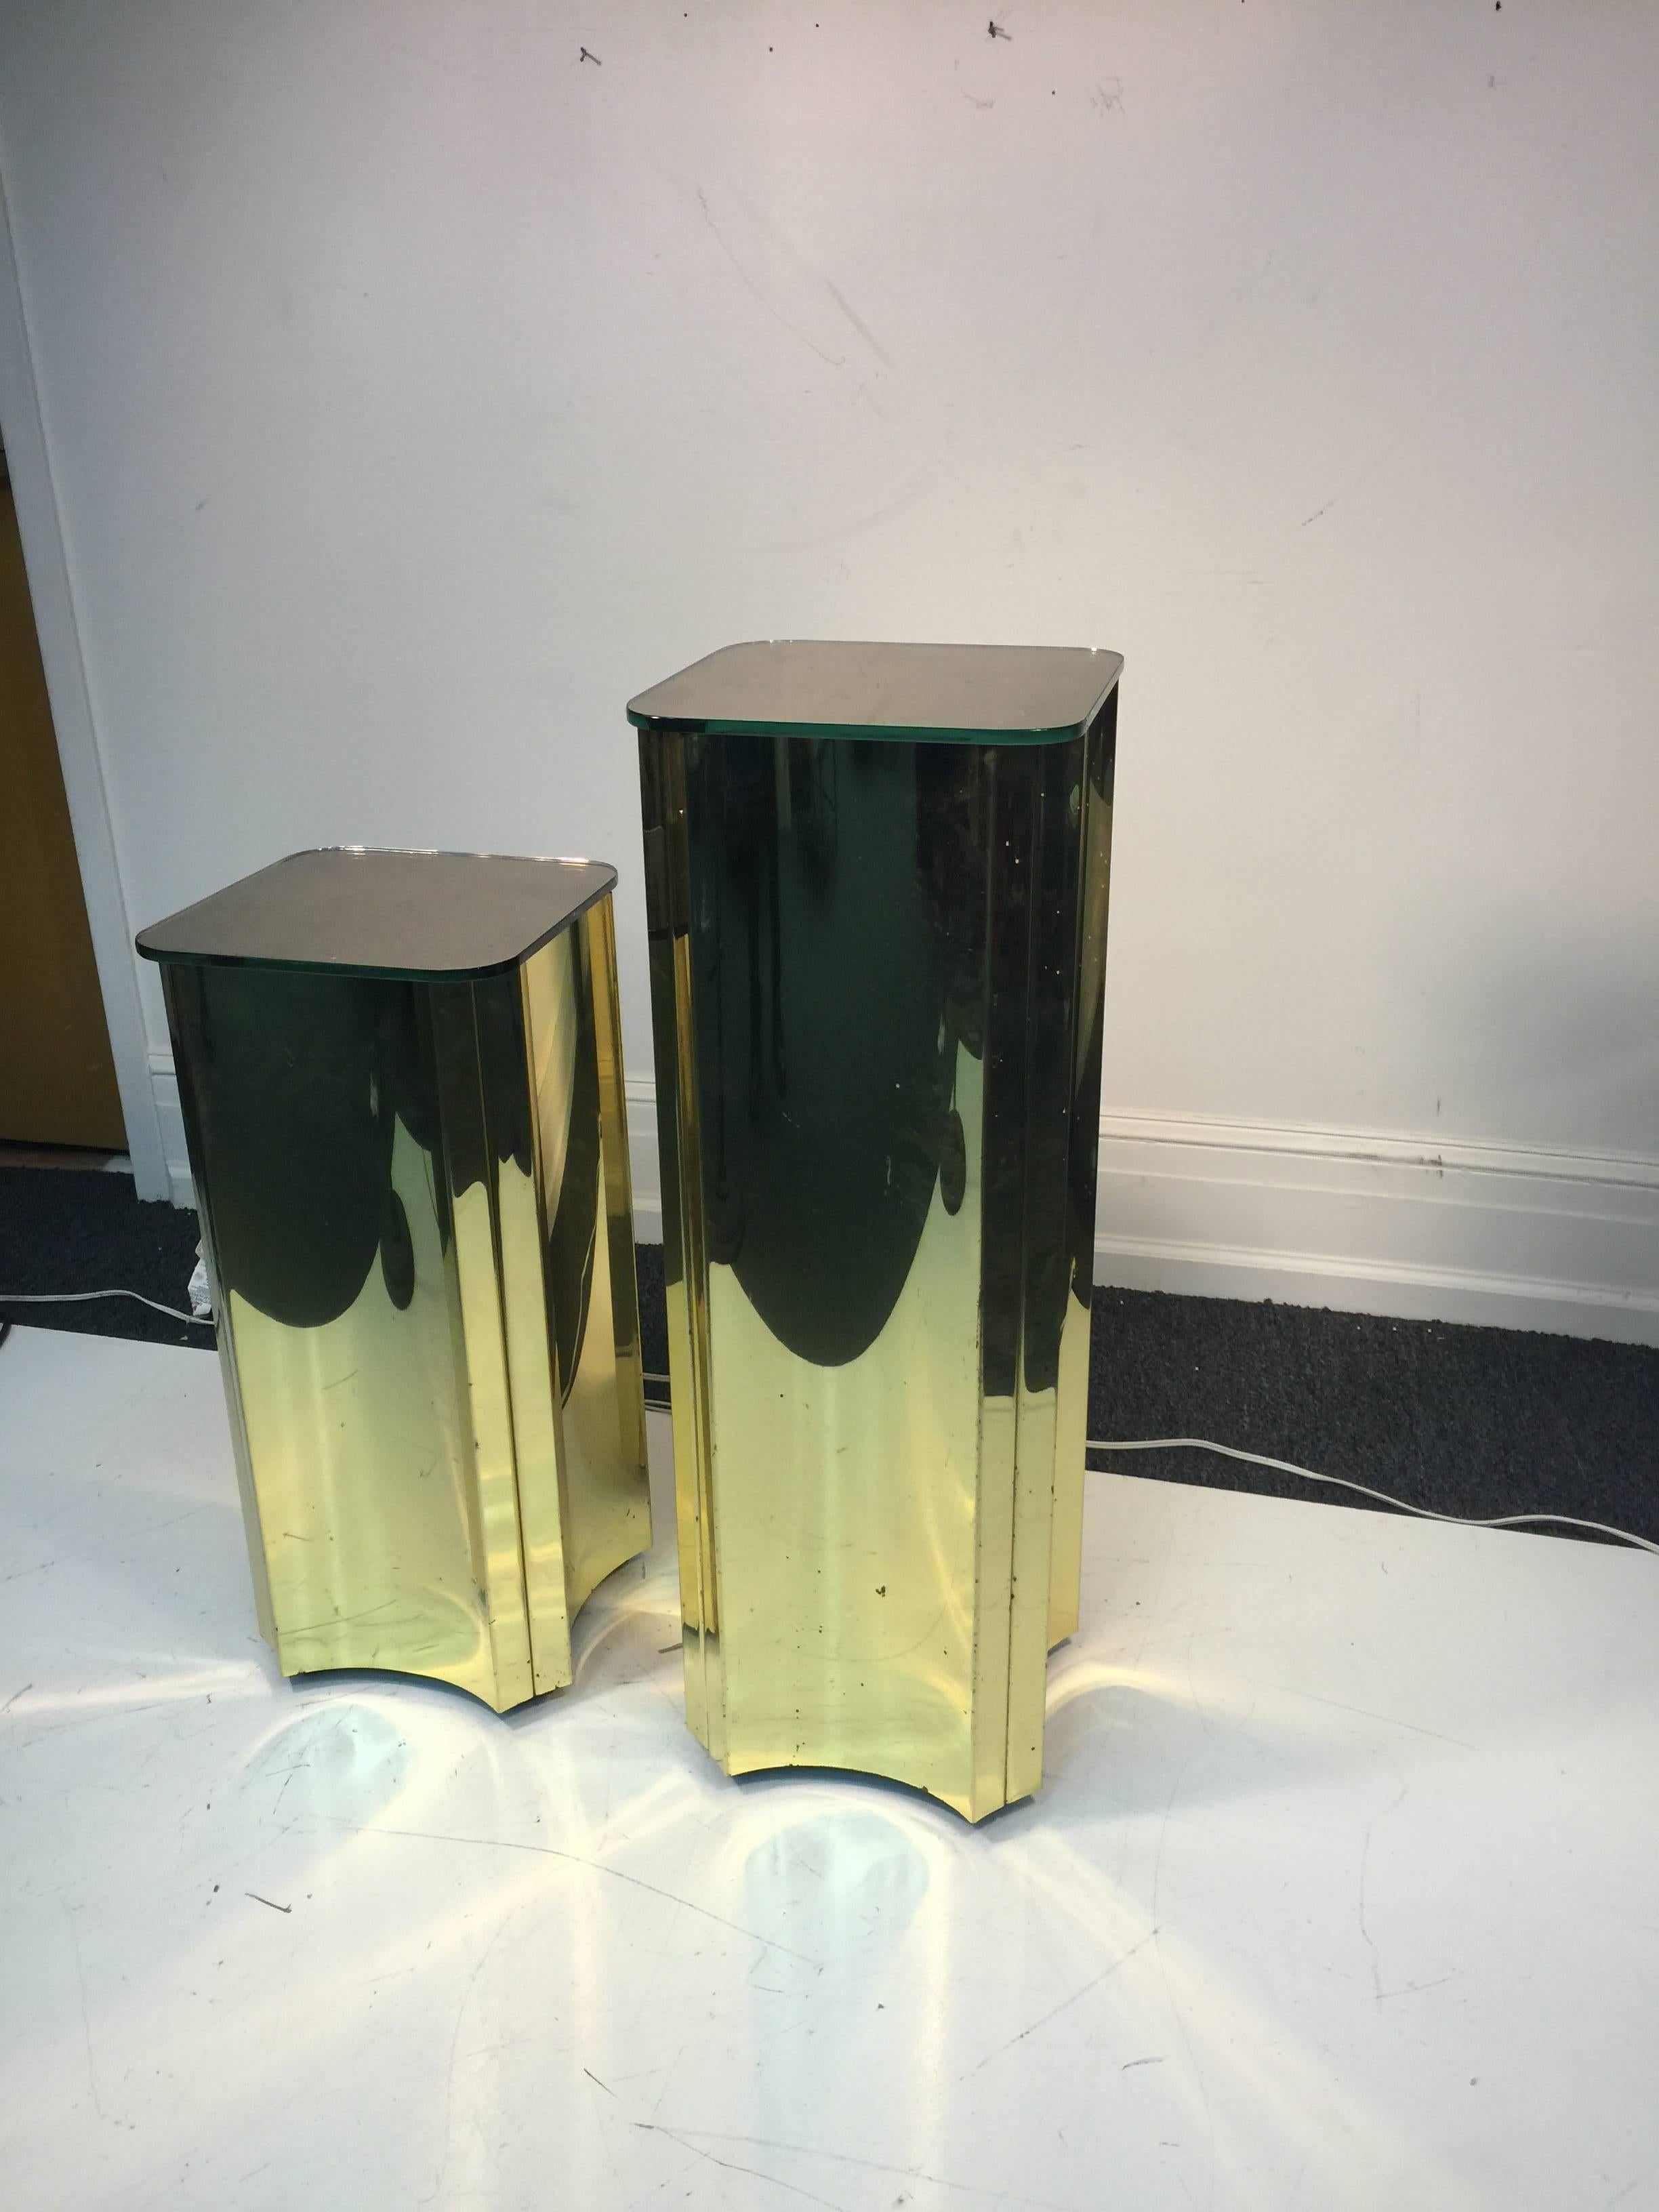 A terrific set of two sculptural brass pedestals with mirrored tops signed, Curtis Jere and dated 1984.

Dimensions:

Larger 36